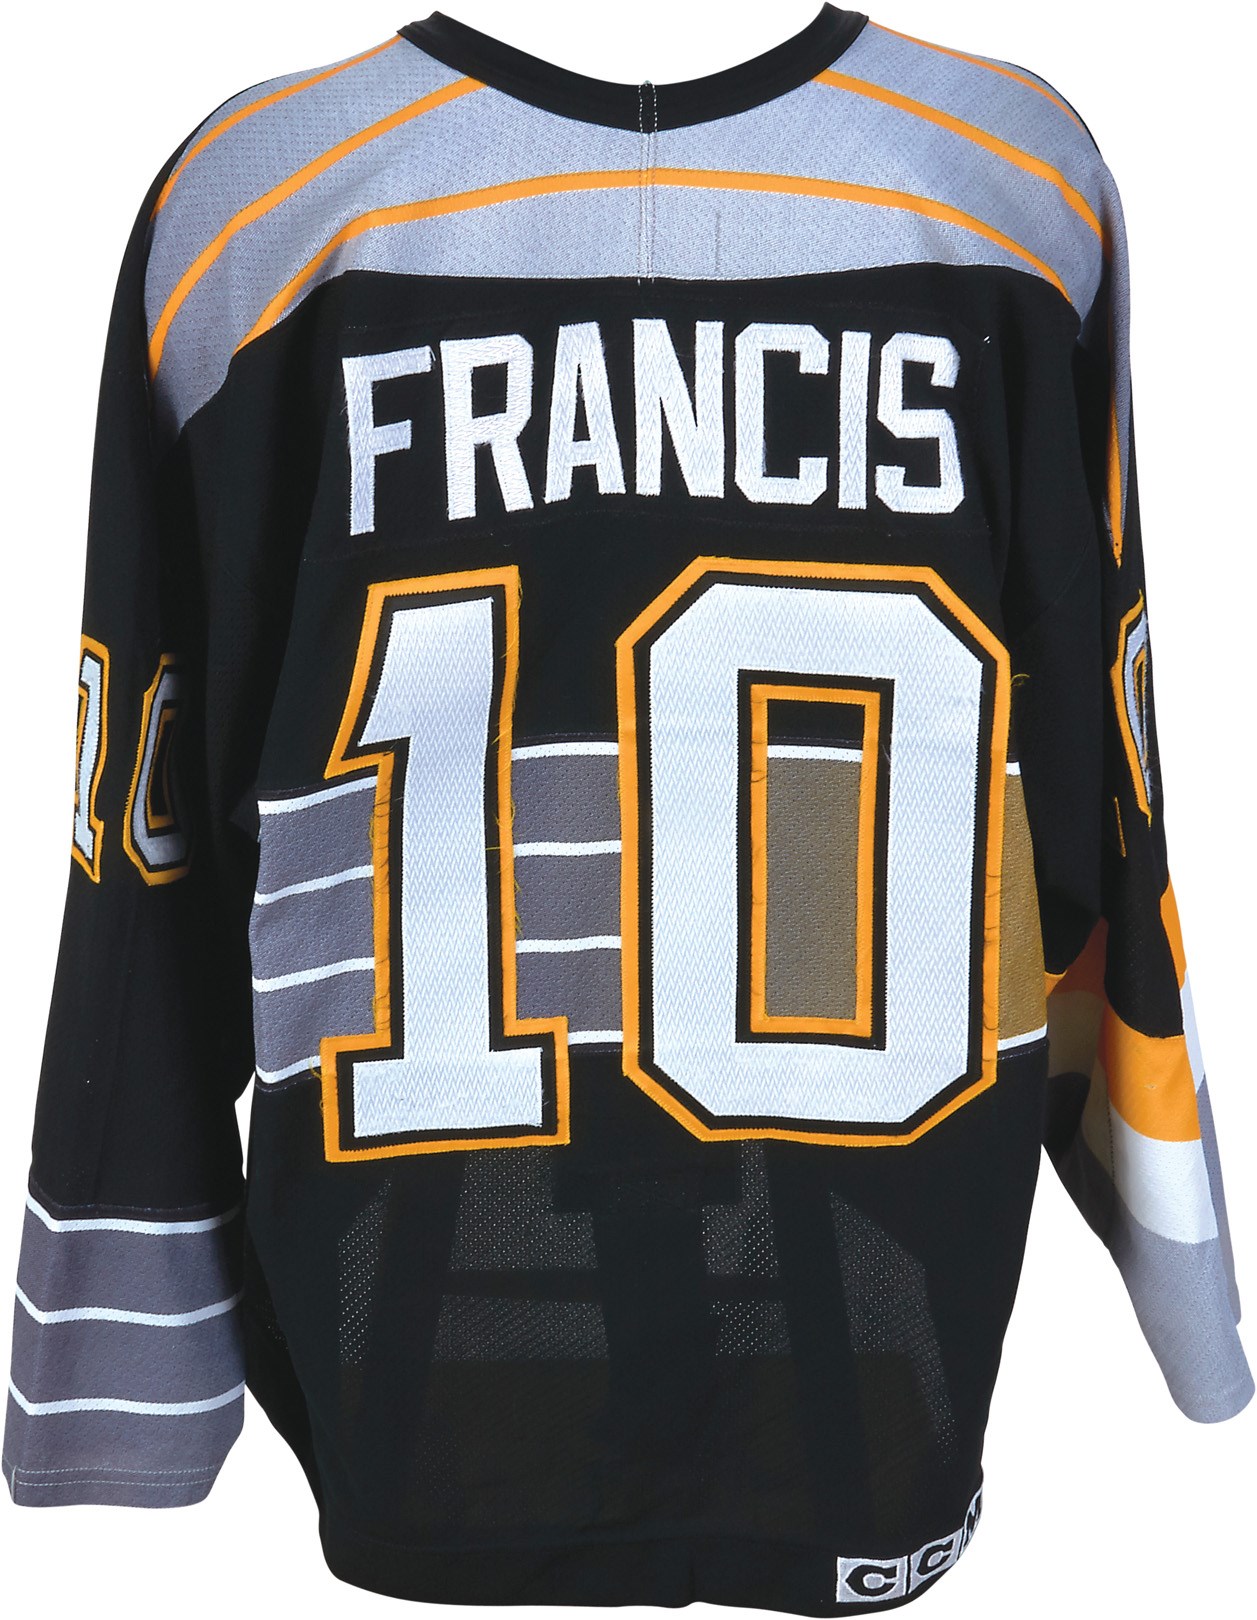 - 1995-96 Ron Francis Pittsburgh Penguins Game Worn Jersey (Photo-Matched)